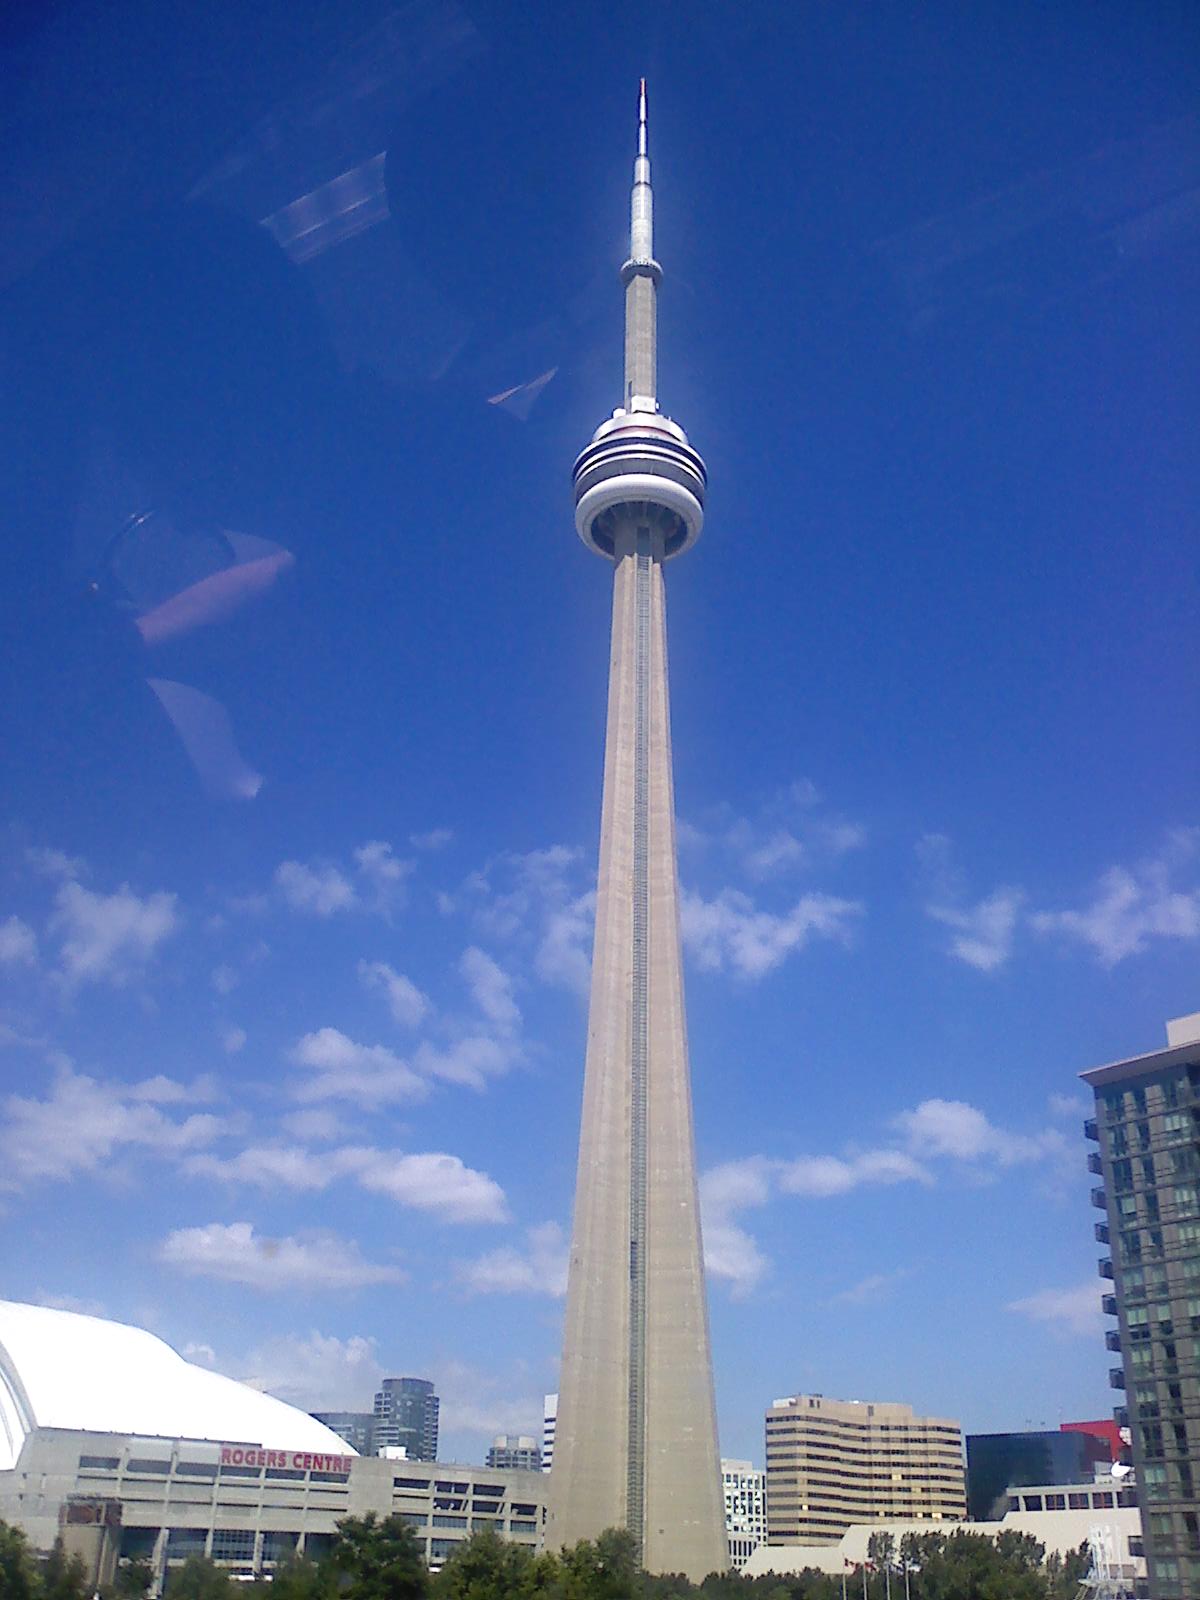 Image of CN Tower